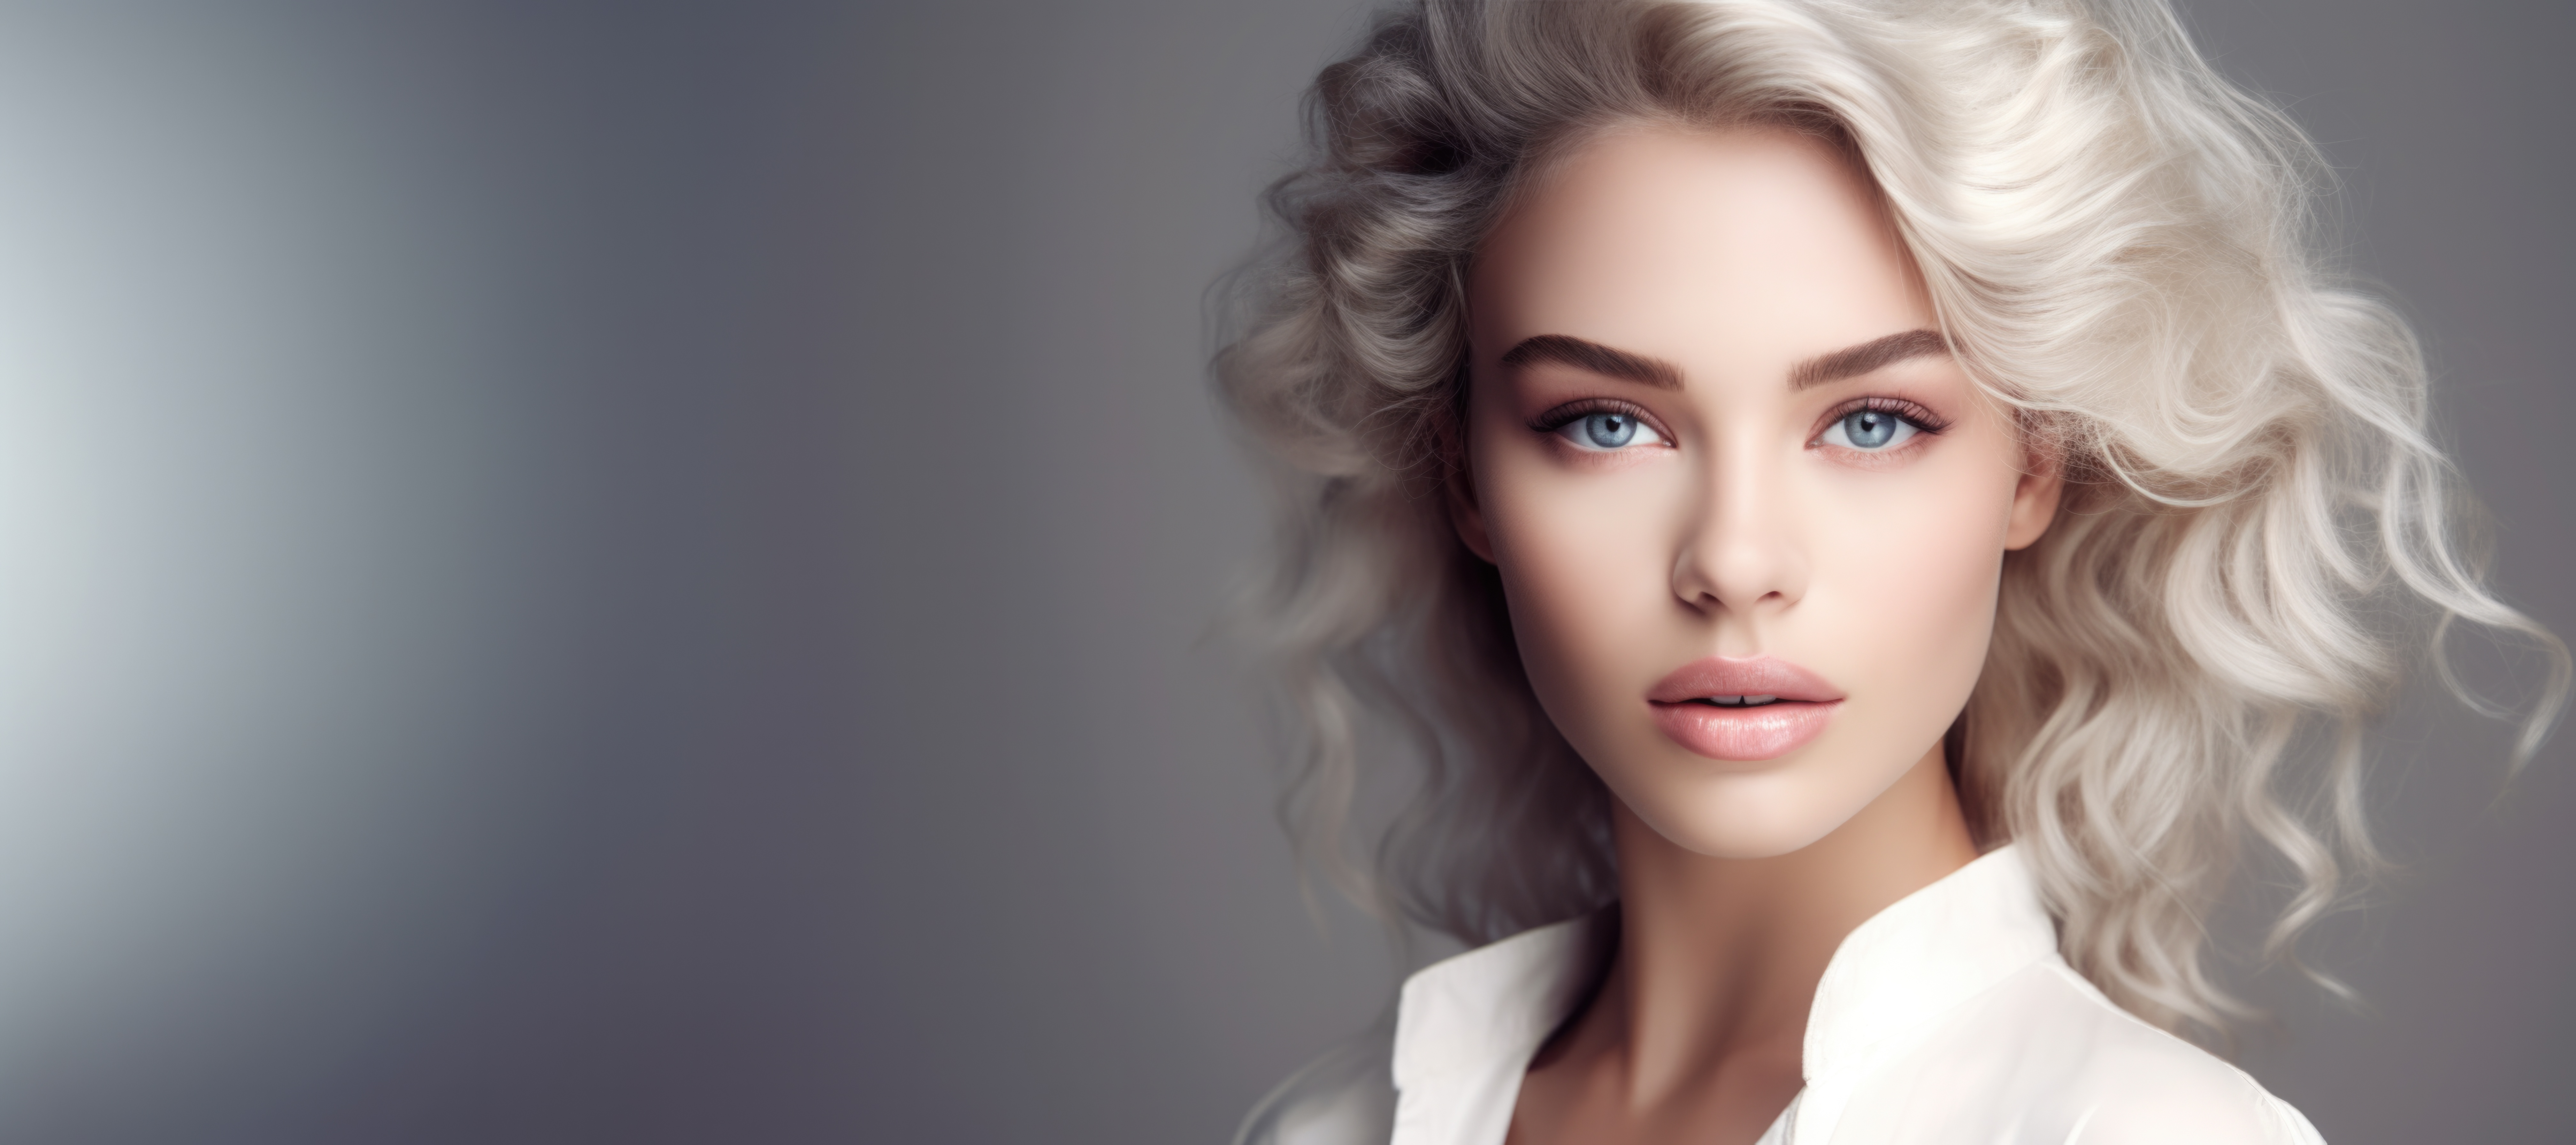 Women Face Simple Background Gray Background Blonde Curly Hair Lips Blue Eyes White Blouse Women Ind 8064x3584